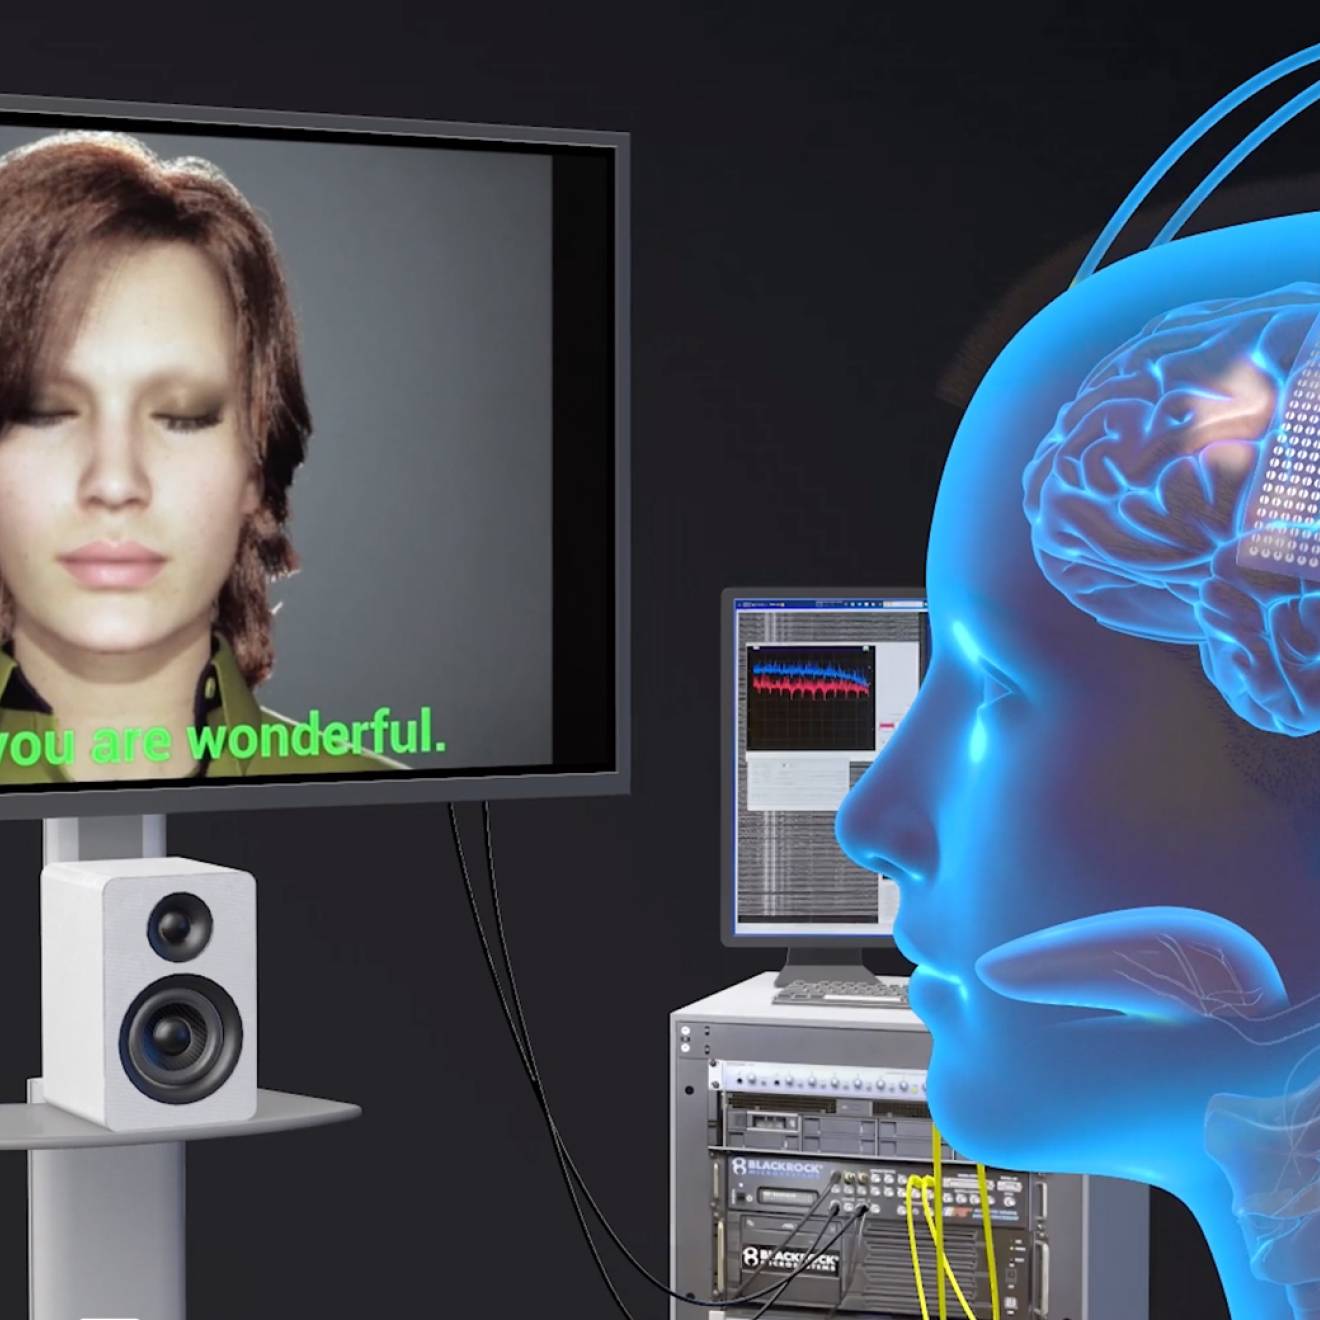 A screen with a digitized woman with a bob that says I think you are wonderful, and a blue illustration of a head with a visible brain lit up speaking to her 